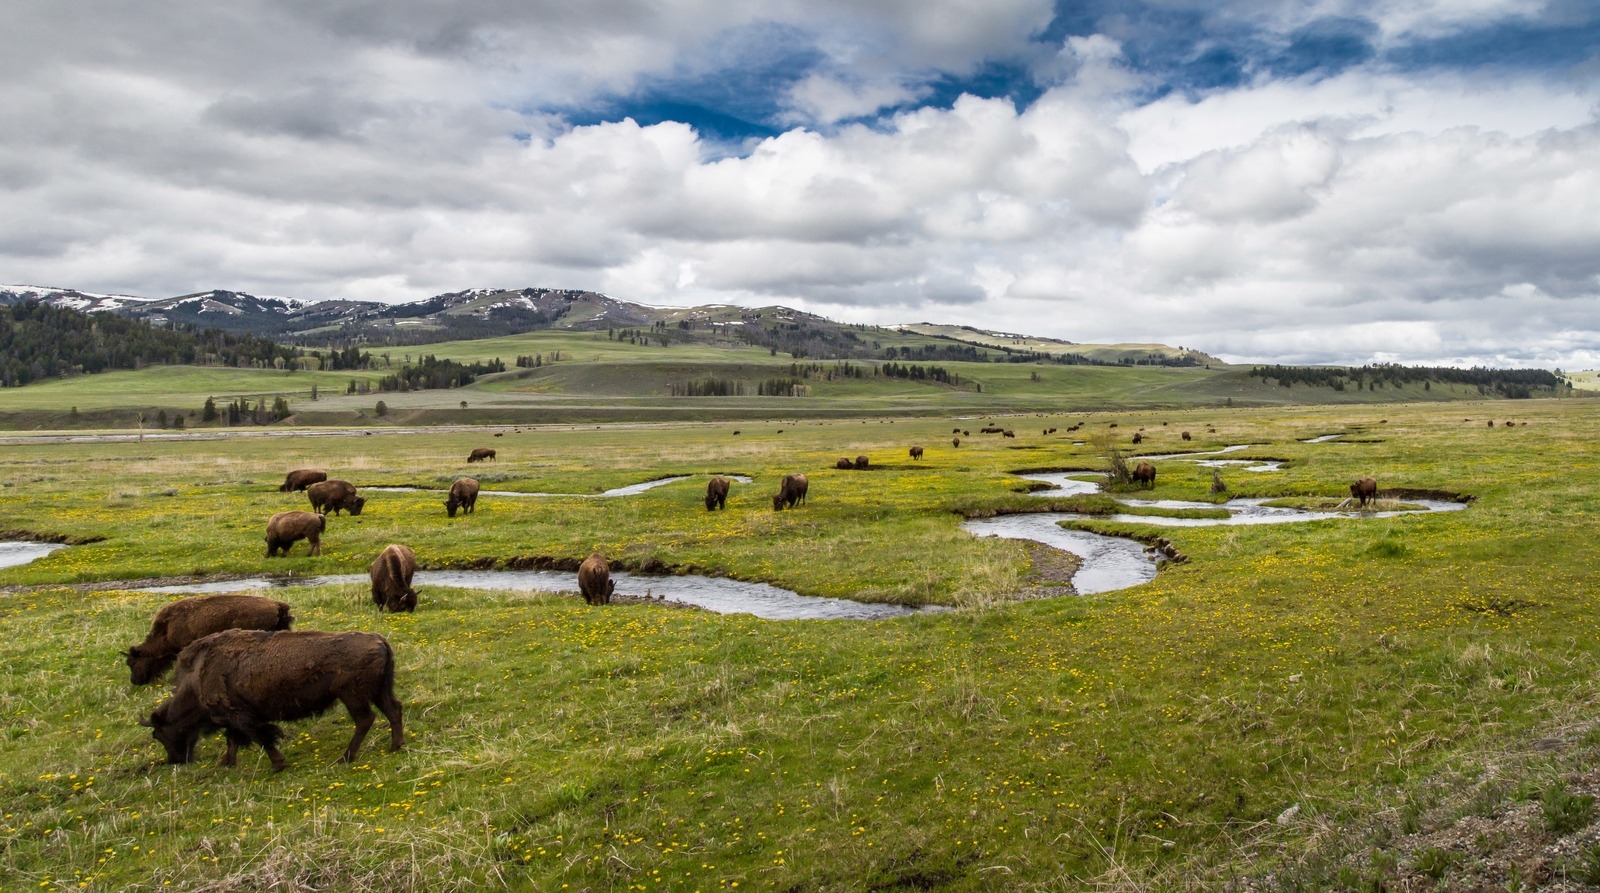 The American Bison is the national mammal of the U.S. Photo by Neal Herbert/NPS